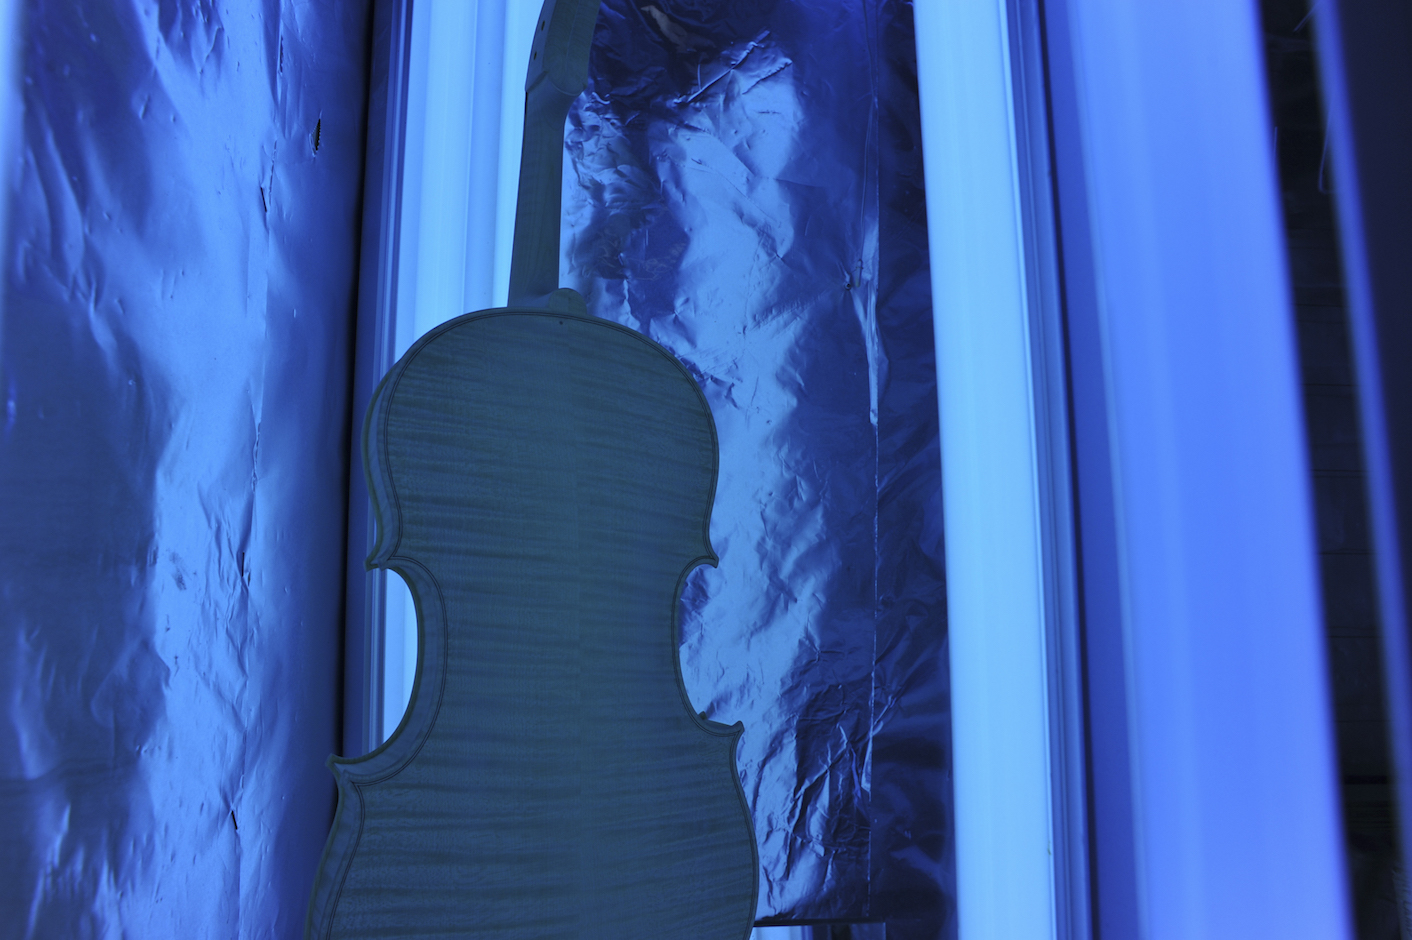 Each instrument will spend some time in the ultraviolet light box before and during varnishing to develop a natural golden color on the wood and to cure the varnish